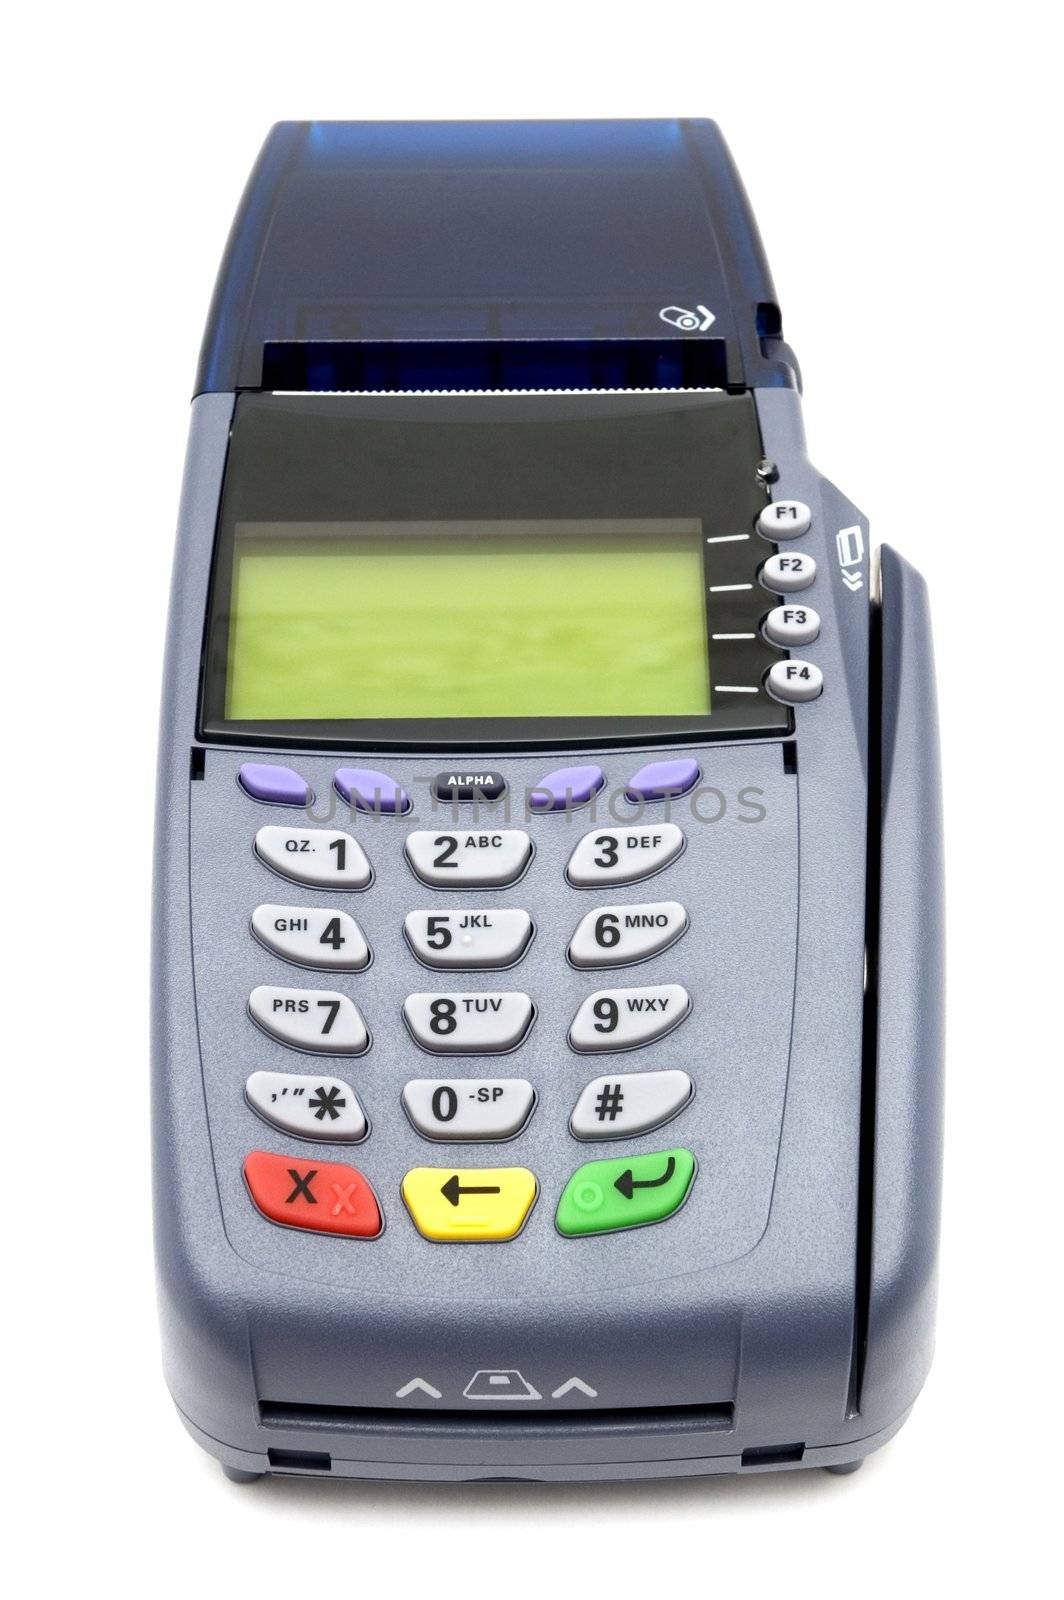 Modern POS terminal with magnetic stripe and chip reader